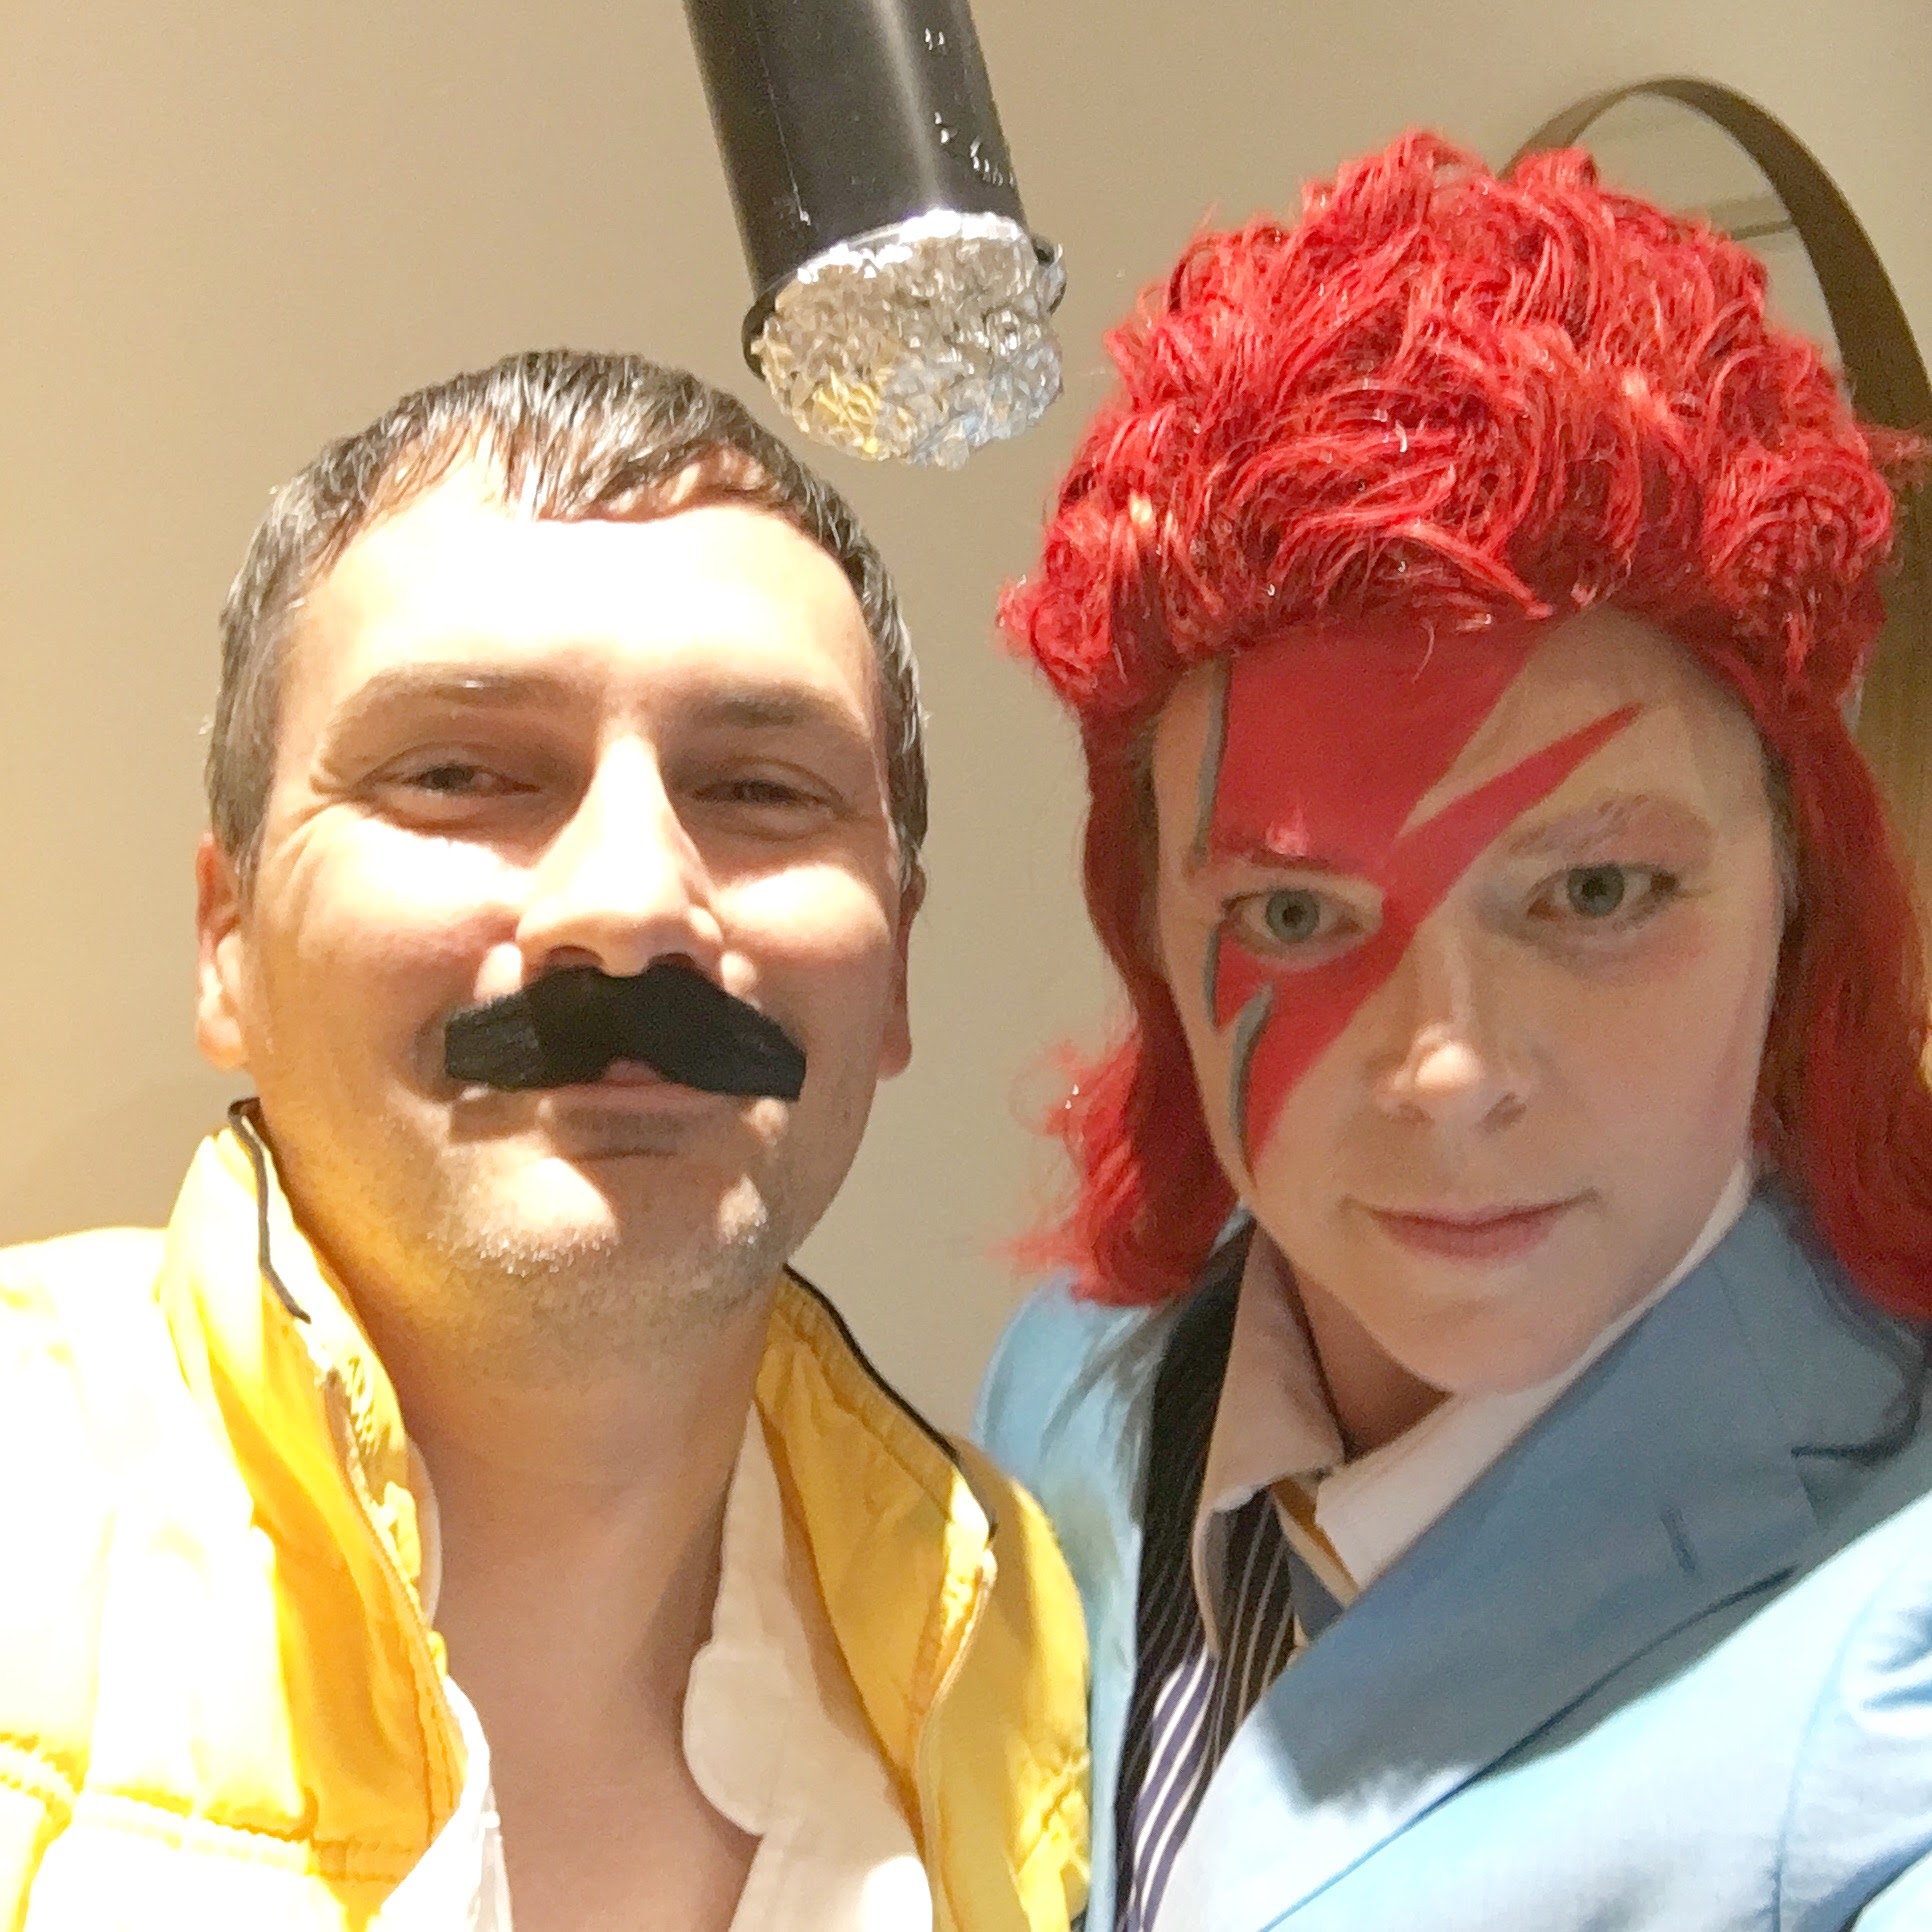 Couple dressed as Freddy Mercury and David Bowie